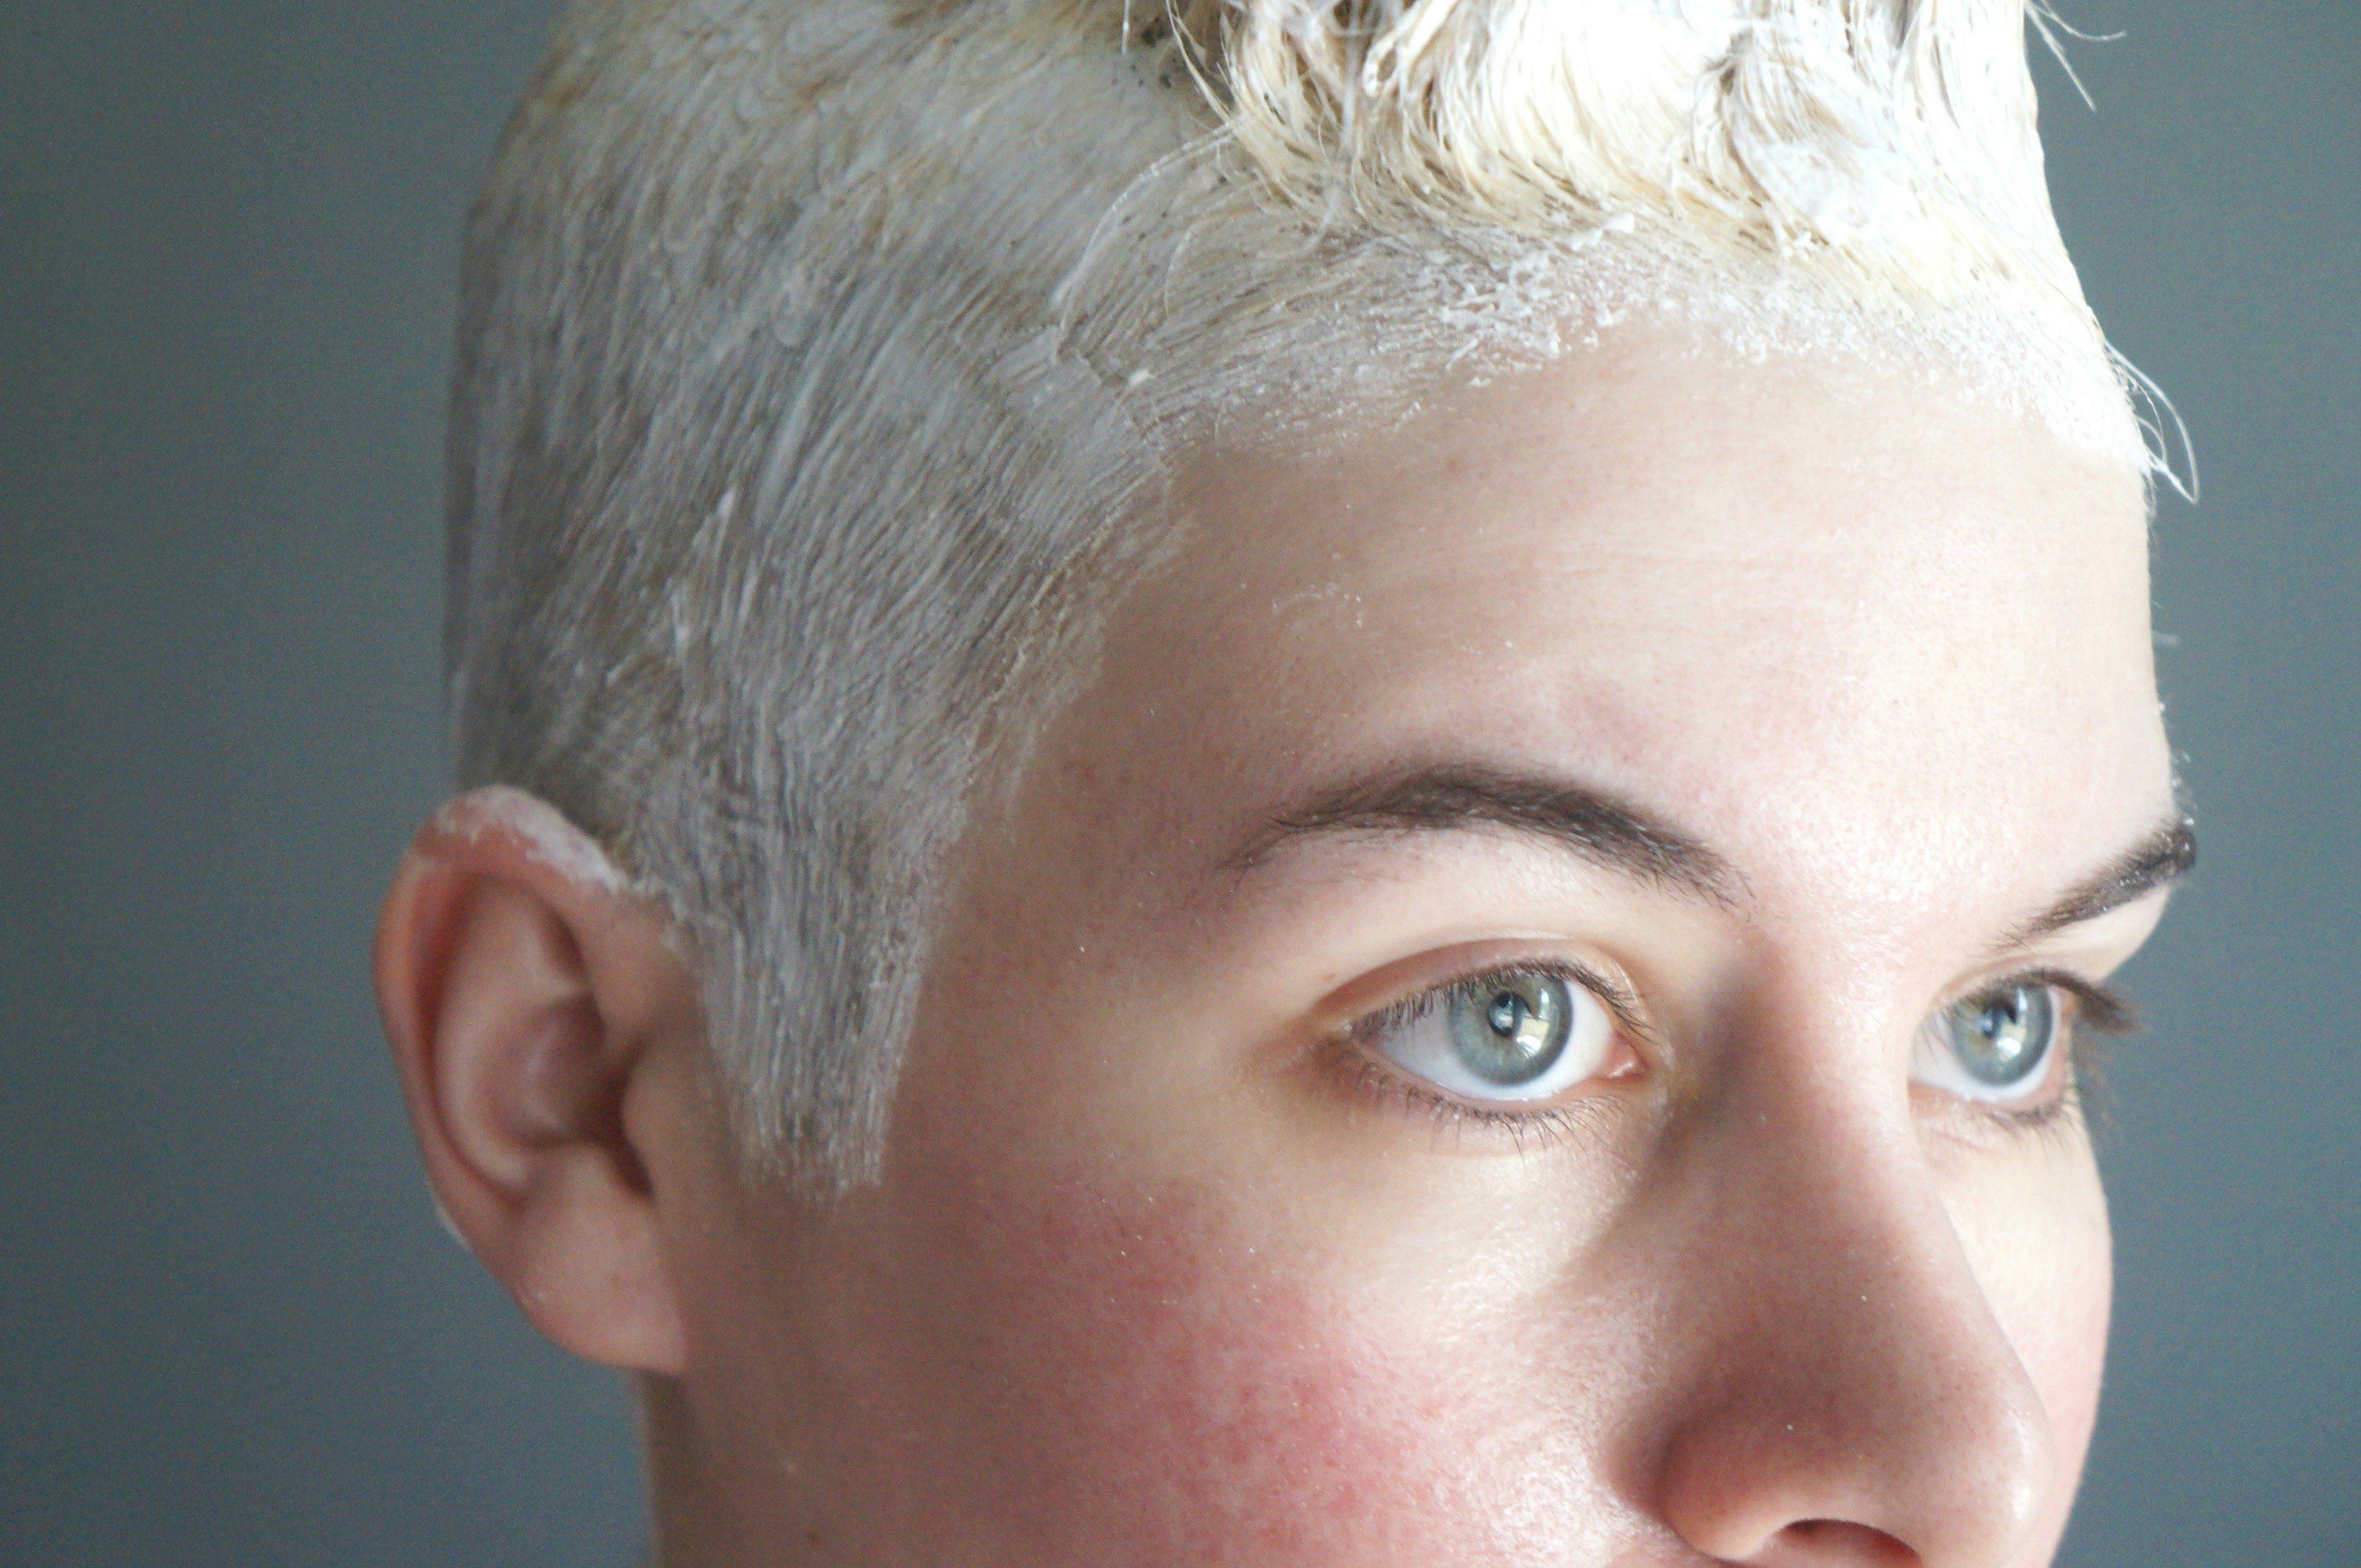 How To Safely Bleach Your Hair At Home For The White Blonde Look